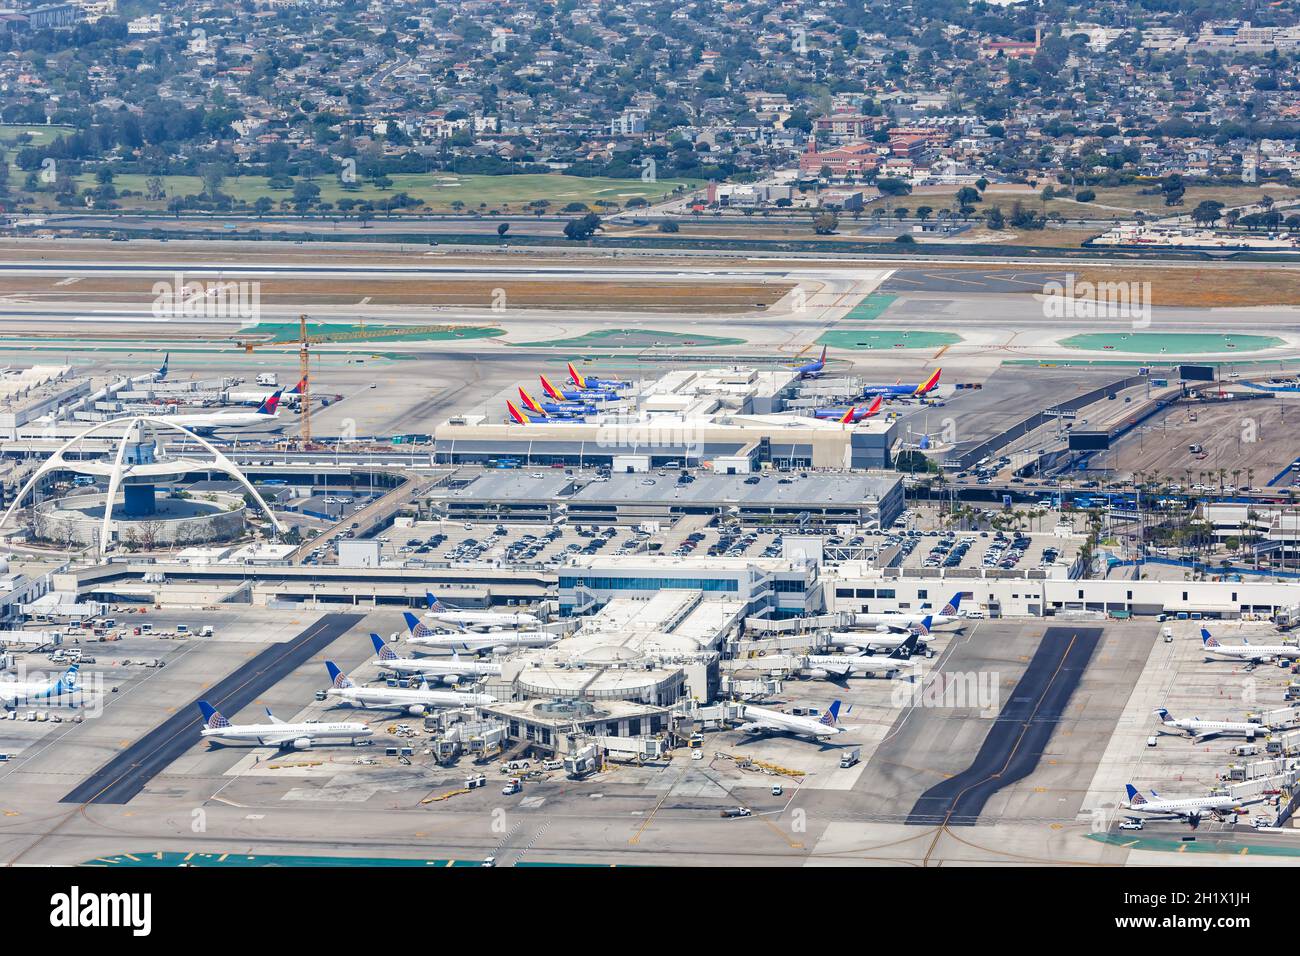 Los Angeles, California - April 14, 2019: Los Angeles International Airport LAX terminals overview aerial view in the United States. Stock Photo